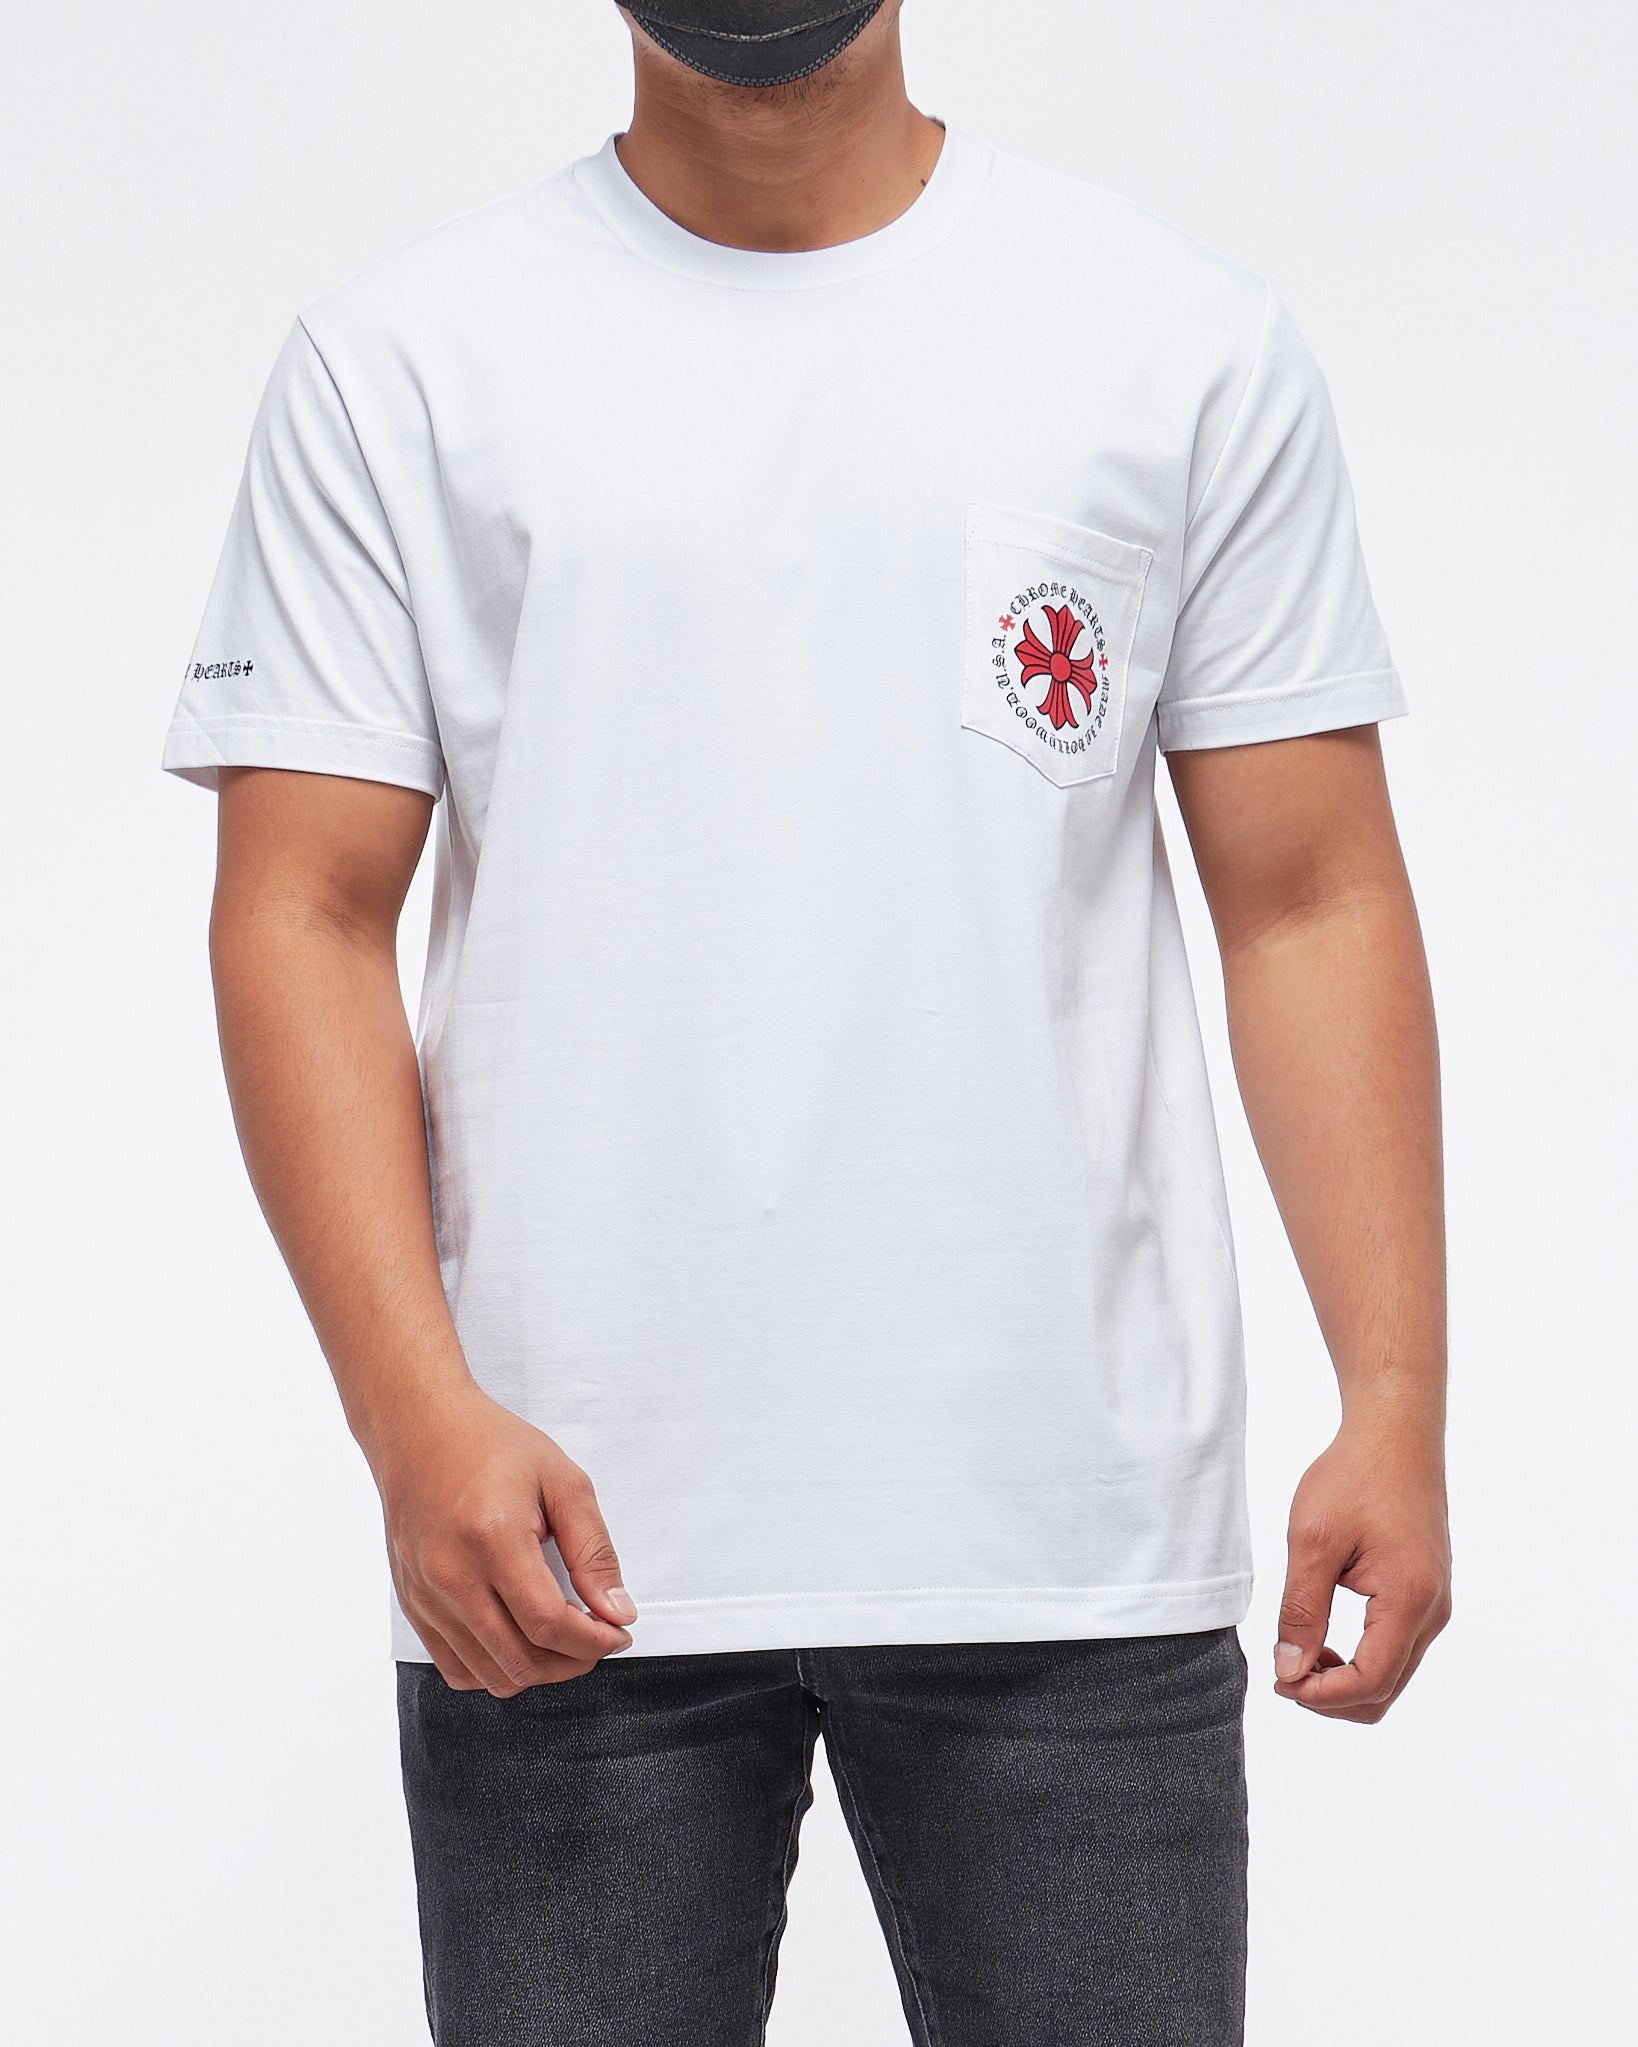 MOI OUTFIT-Red Cross Back Printed Men T-Shirt 15.90